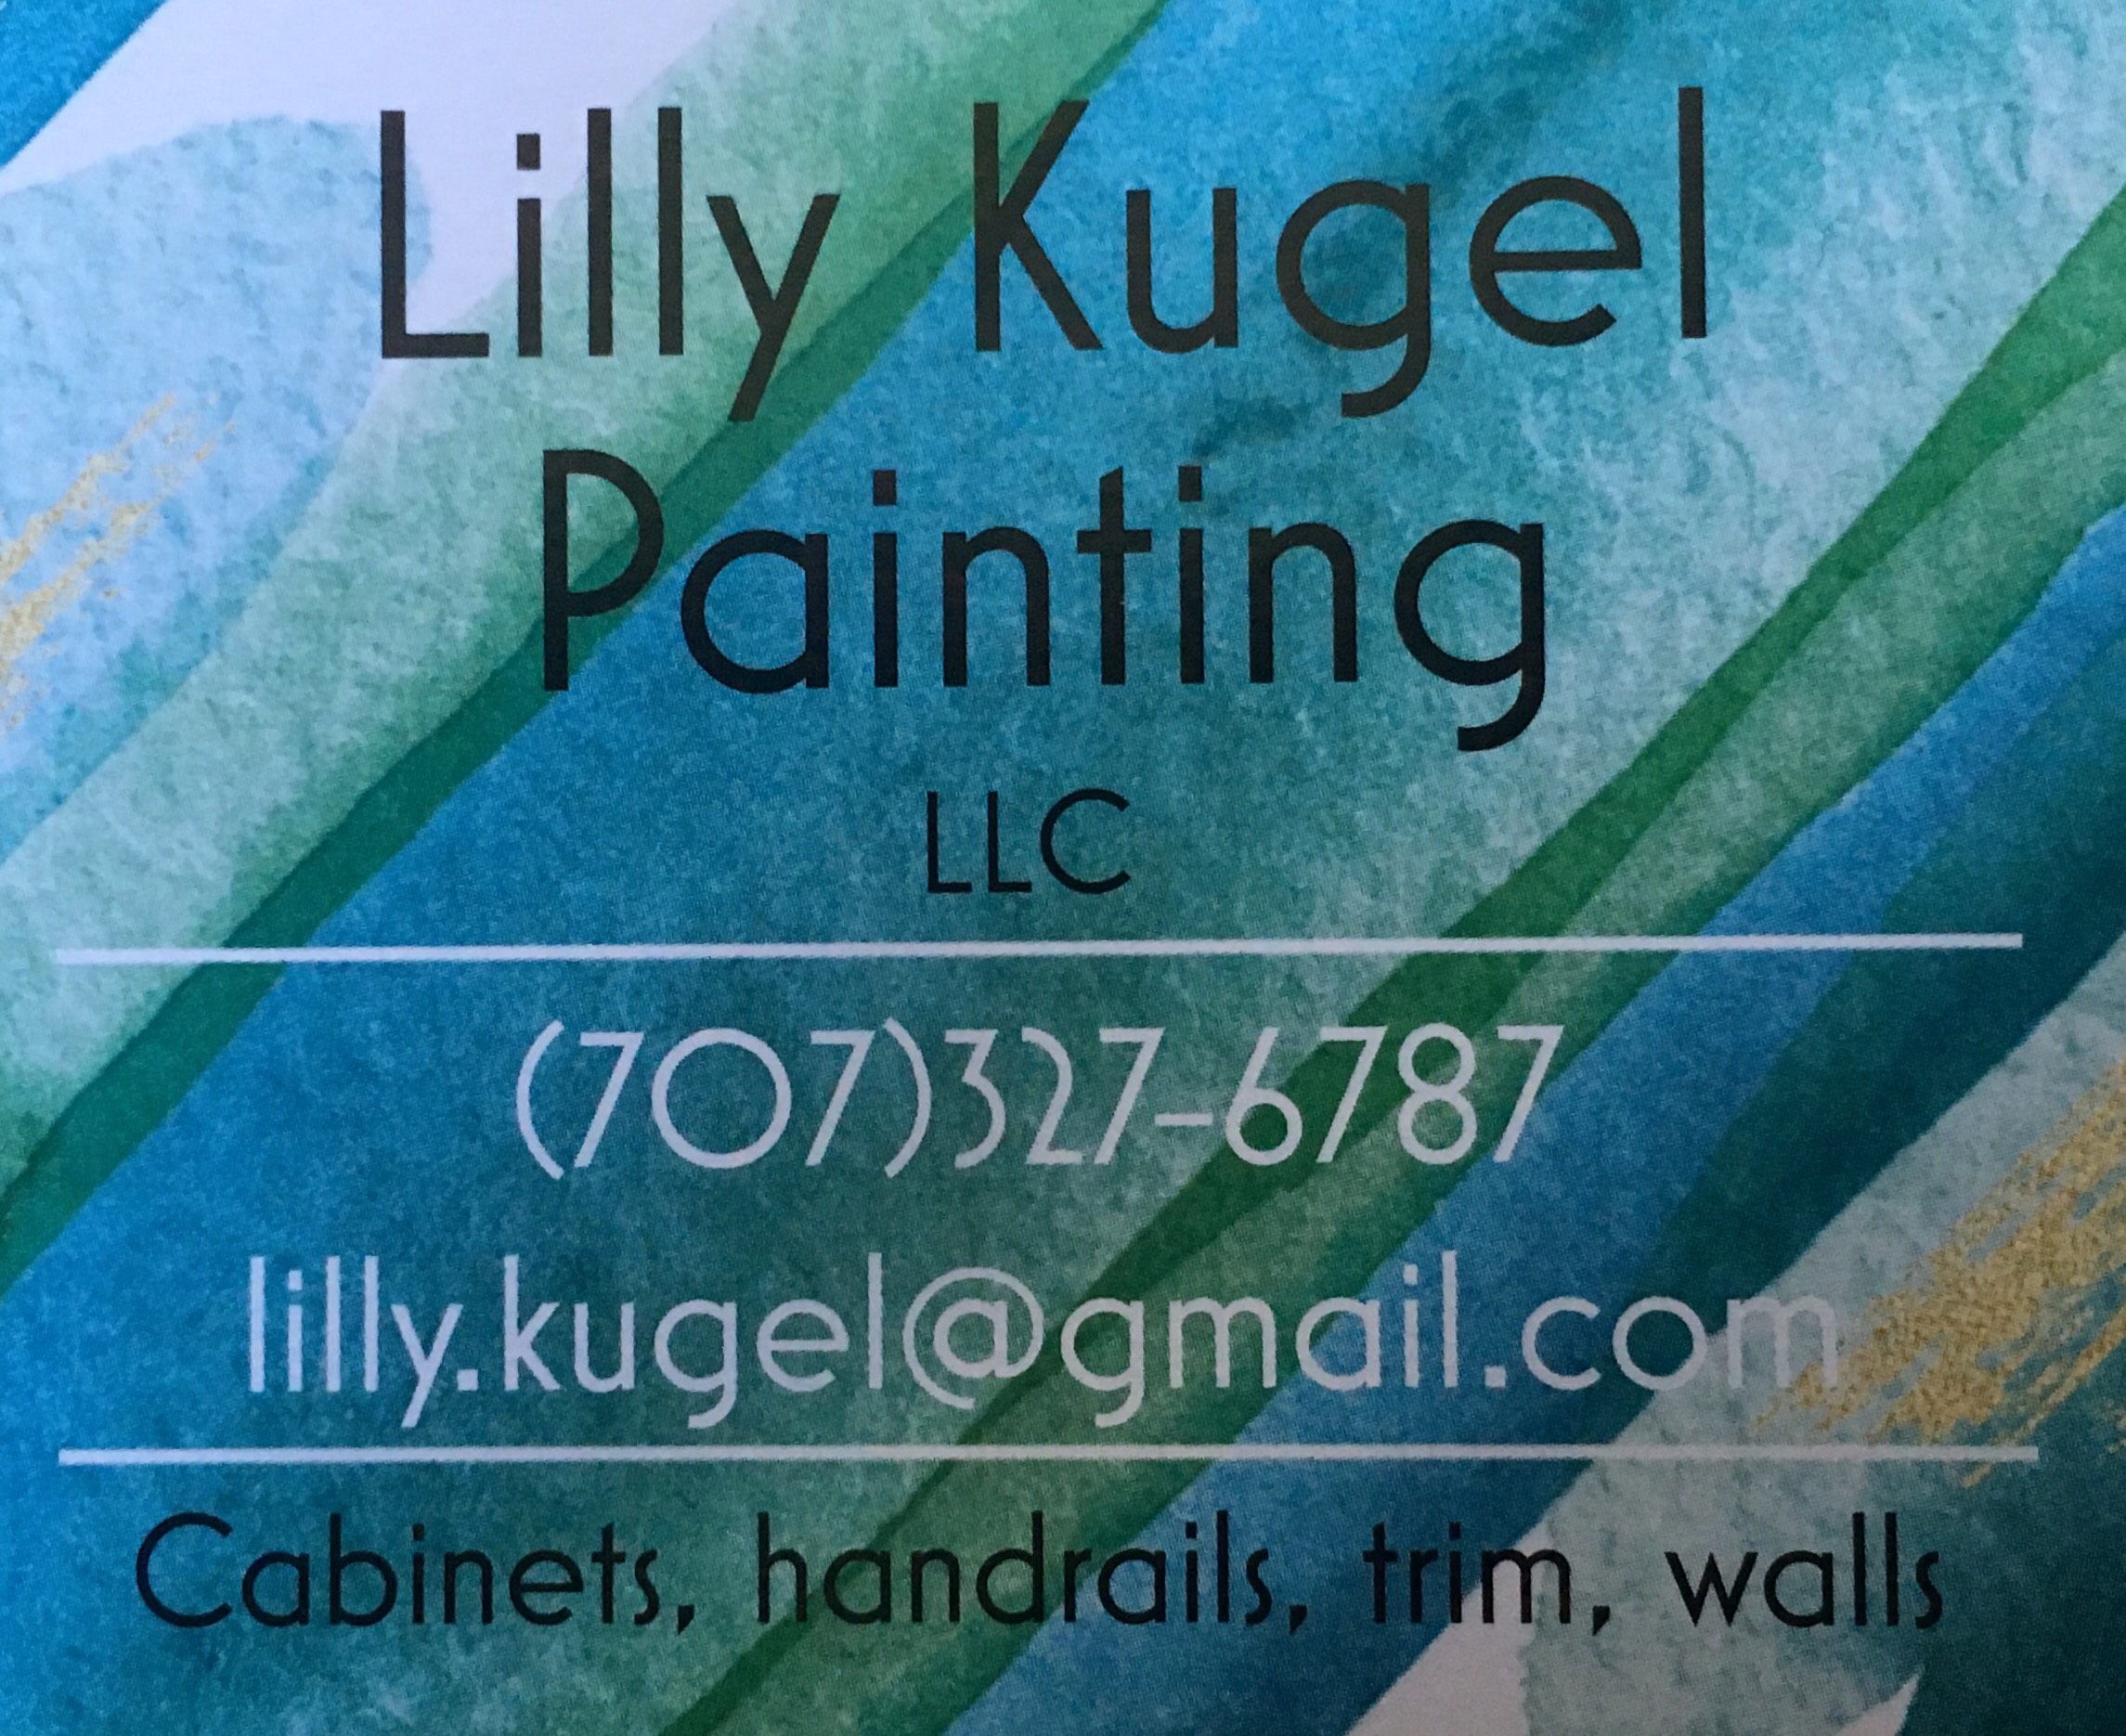 Lilly Kugel Painting Logo